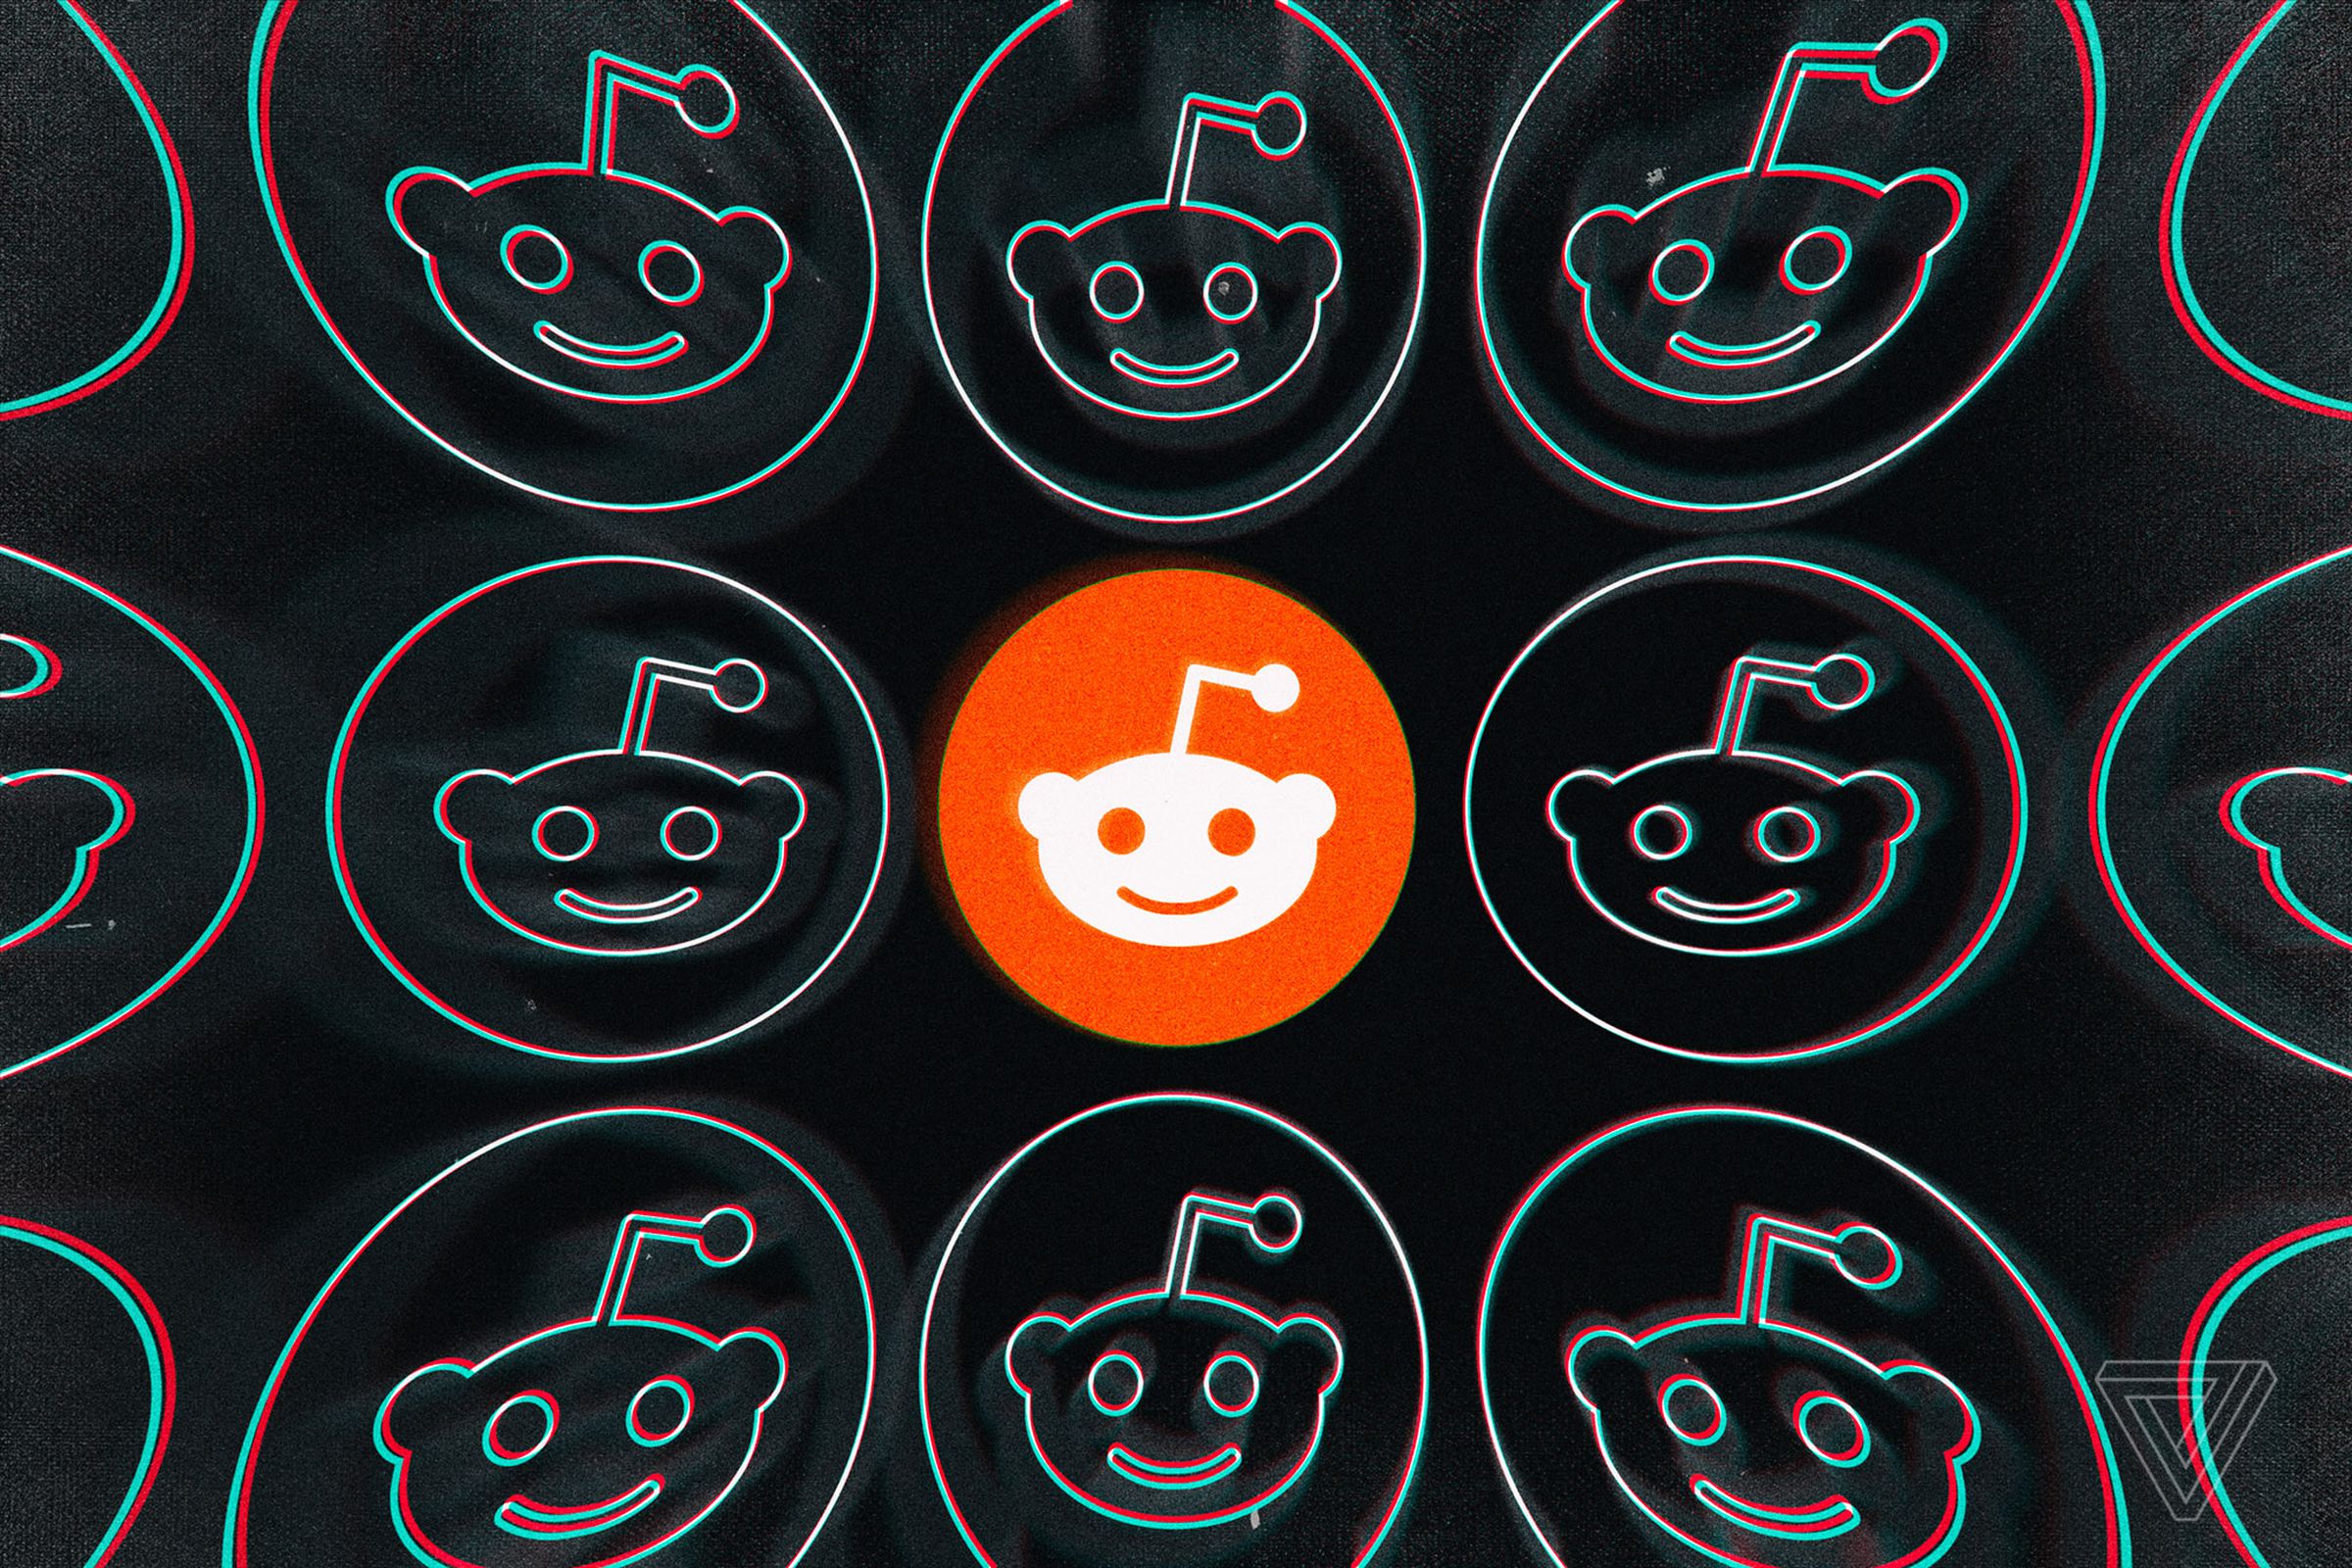 Reddit has brought back its April Fools’ Day project.